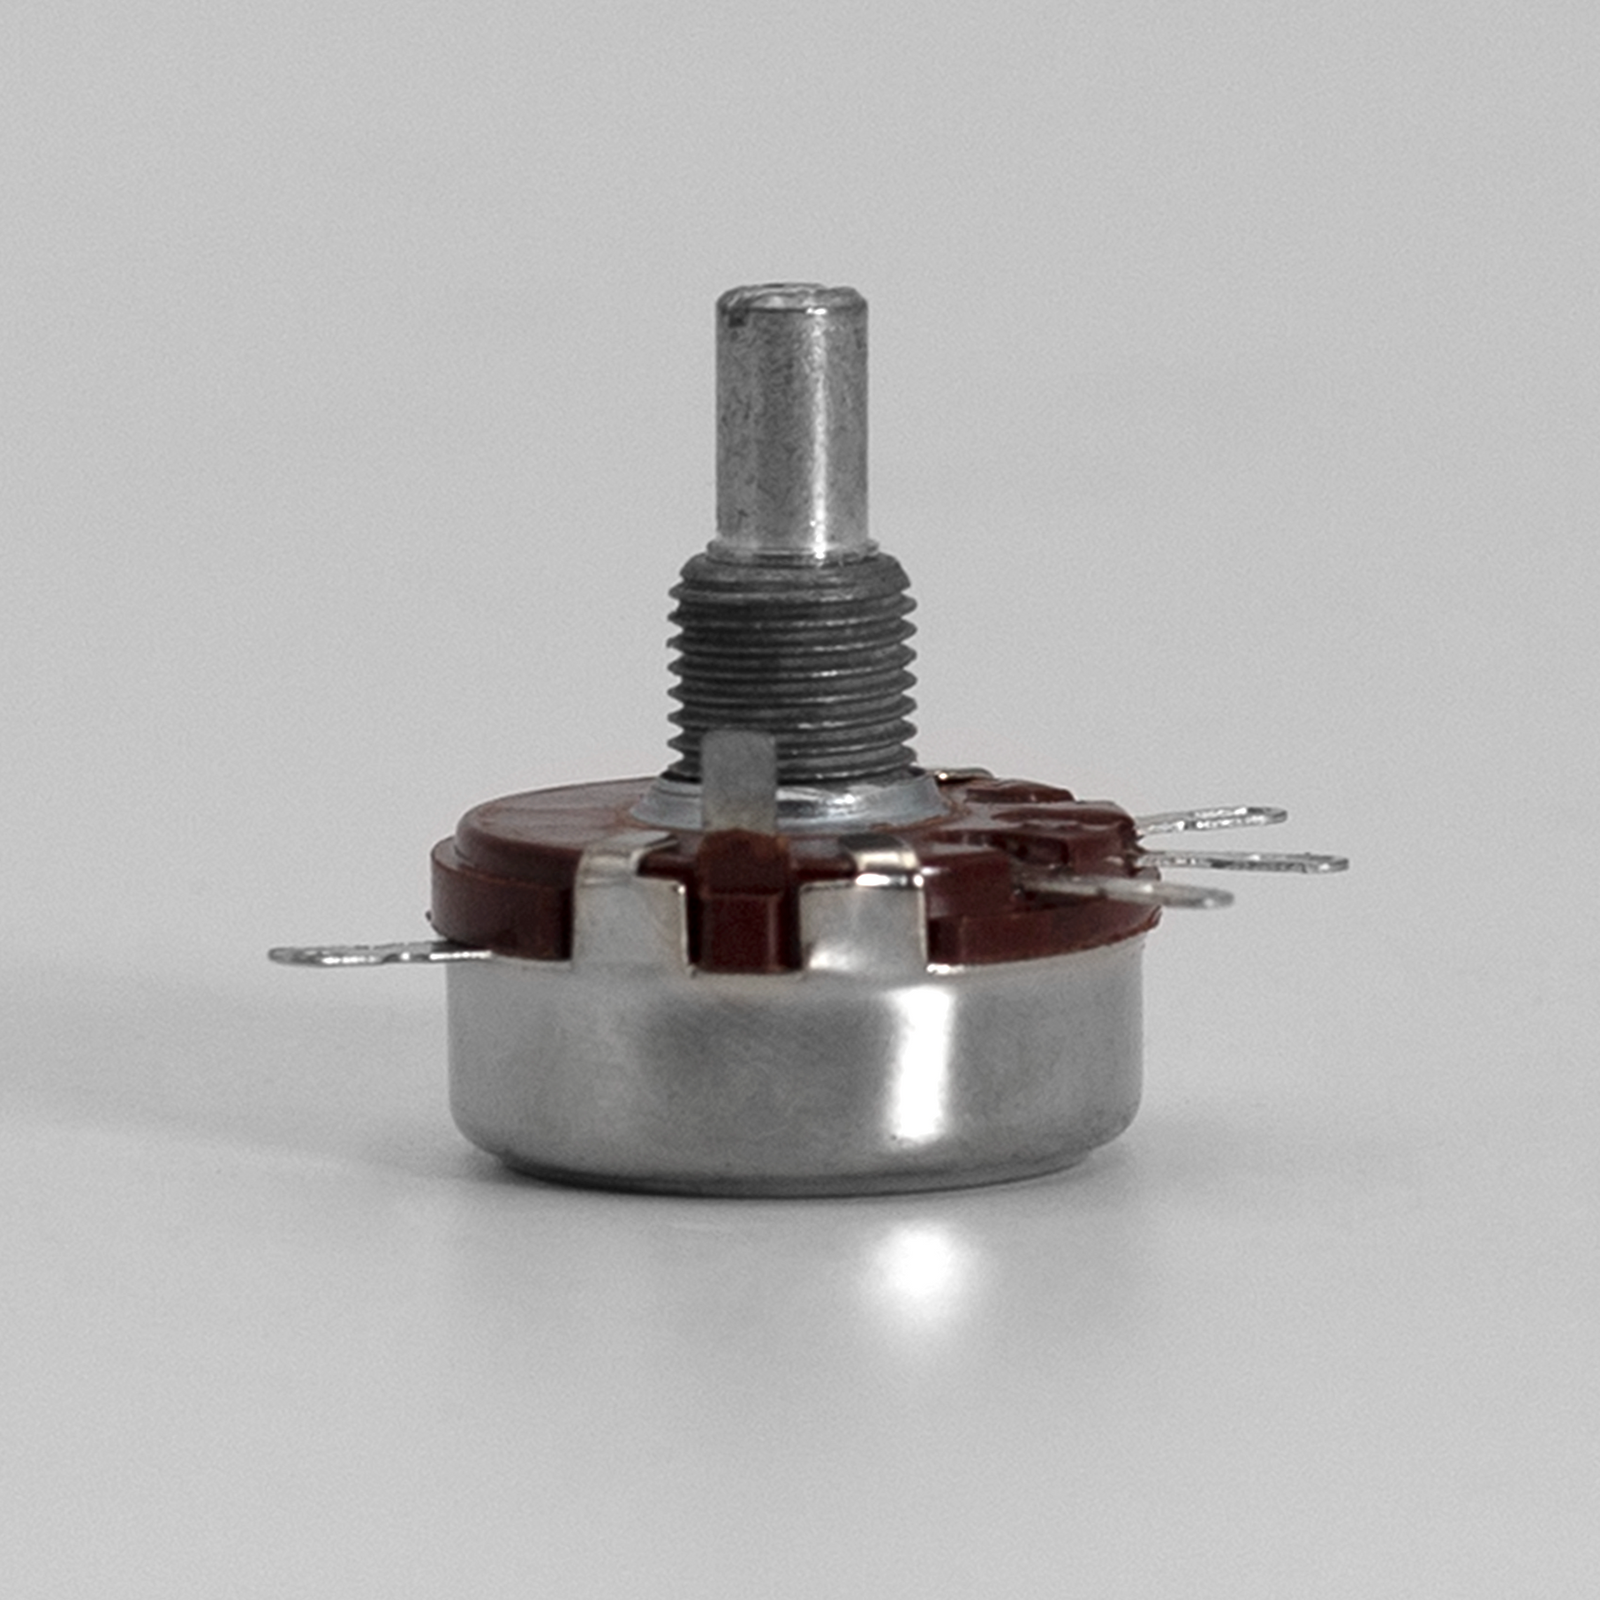 2W-1M Potentiometer used for heat bag sealing machines